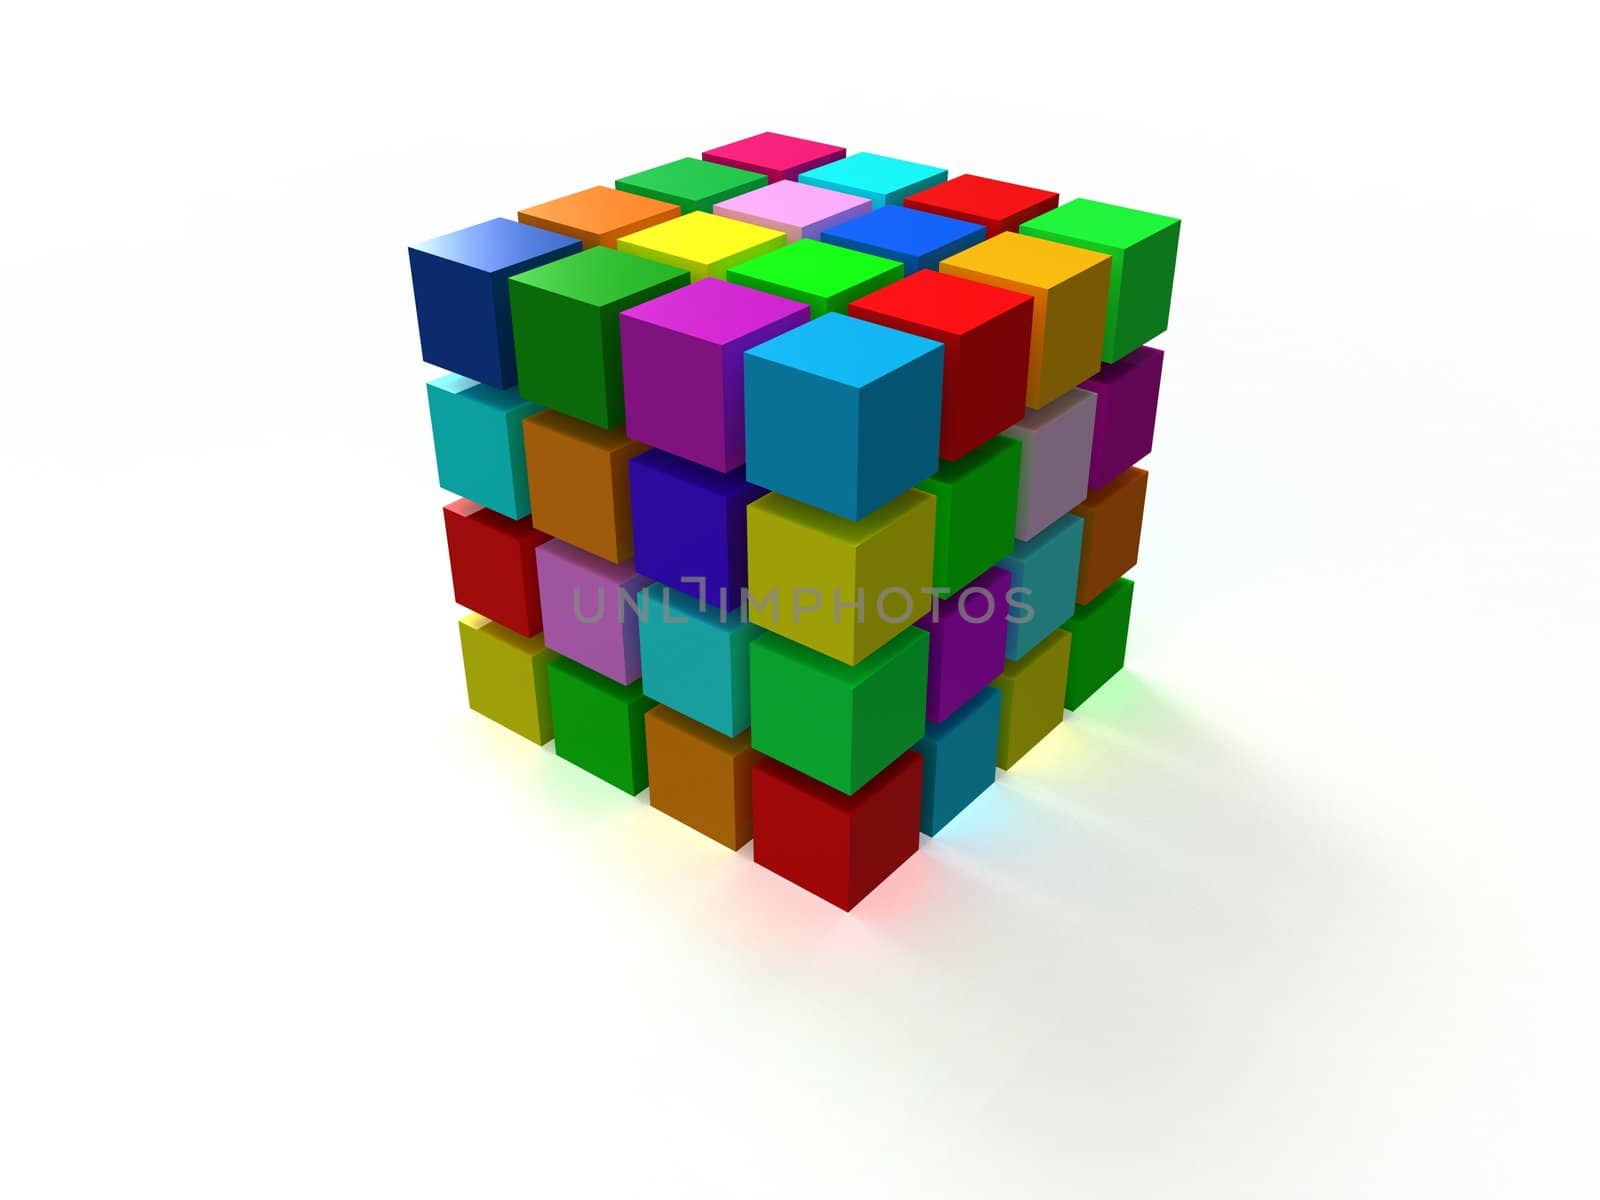 4x4 colorful ordered cube assembling from blocks isolated on white background by vermicule